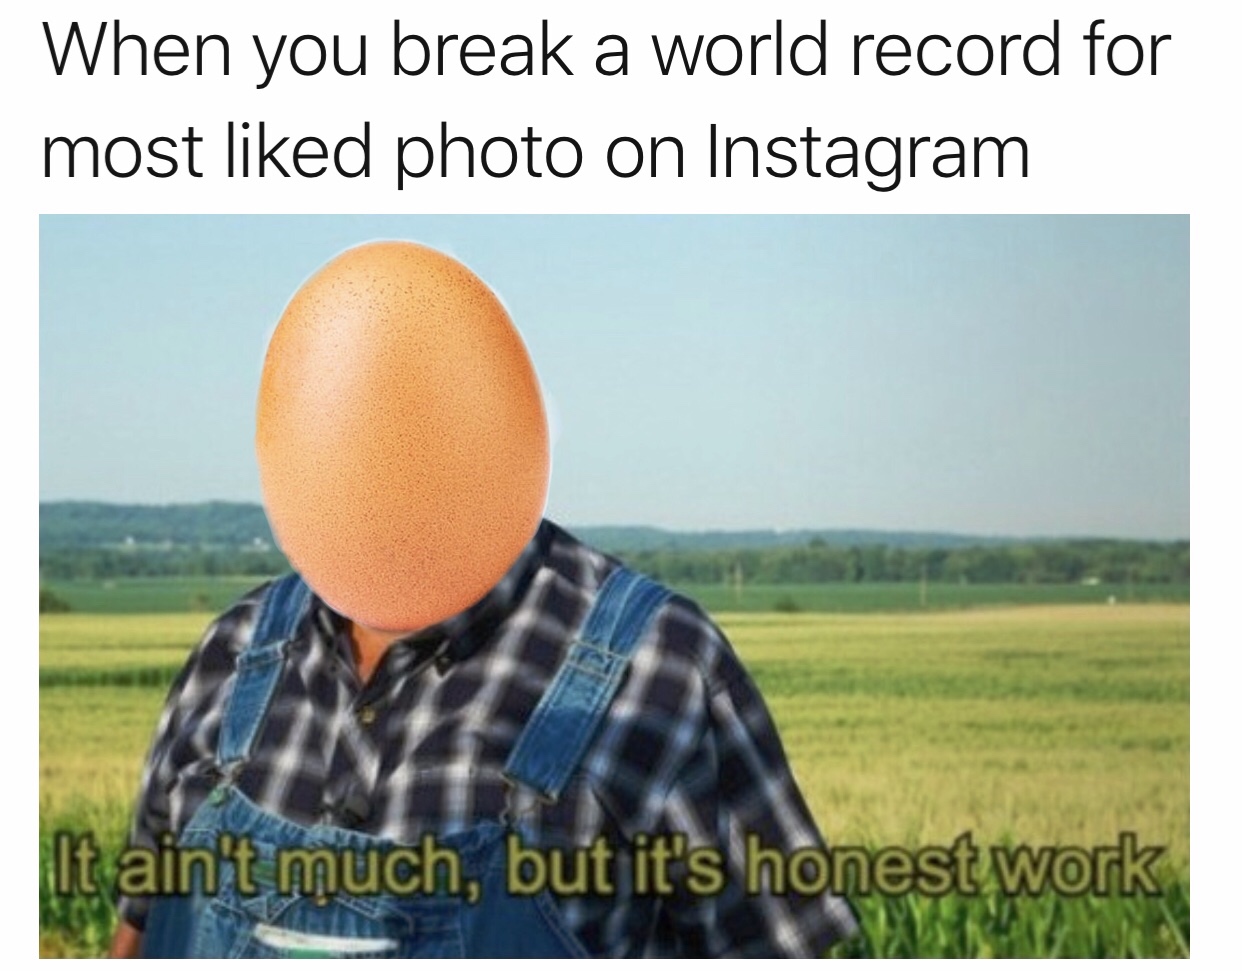 egg memes - When you break a world record for most d photo on Instagram It ain't much, but it's honest work